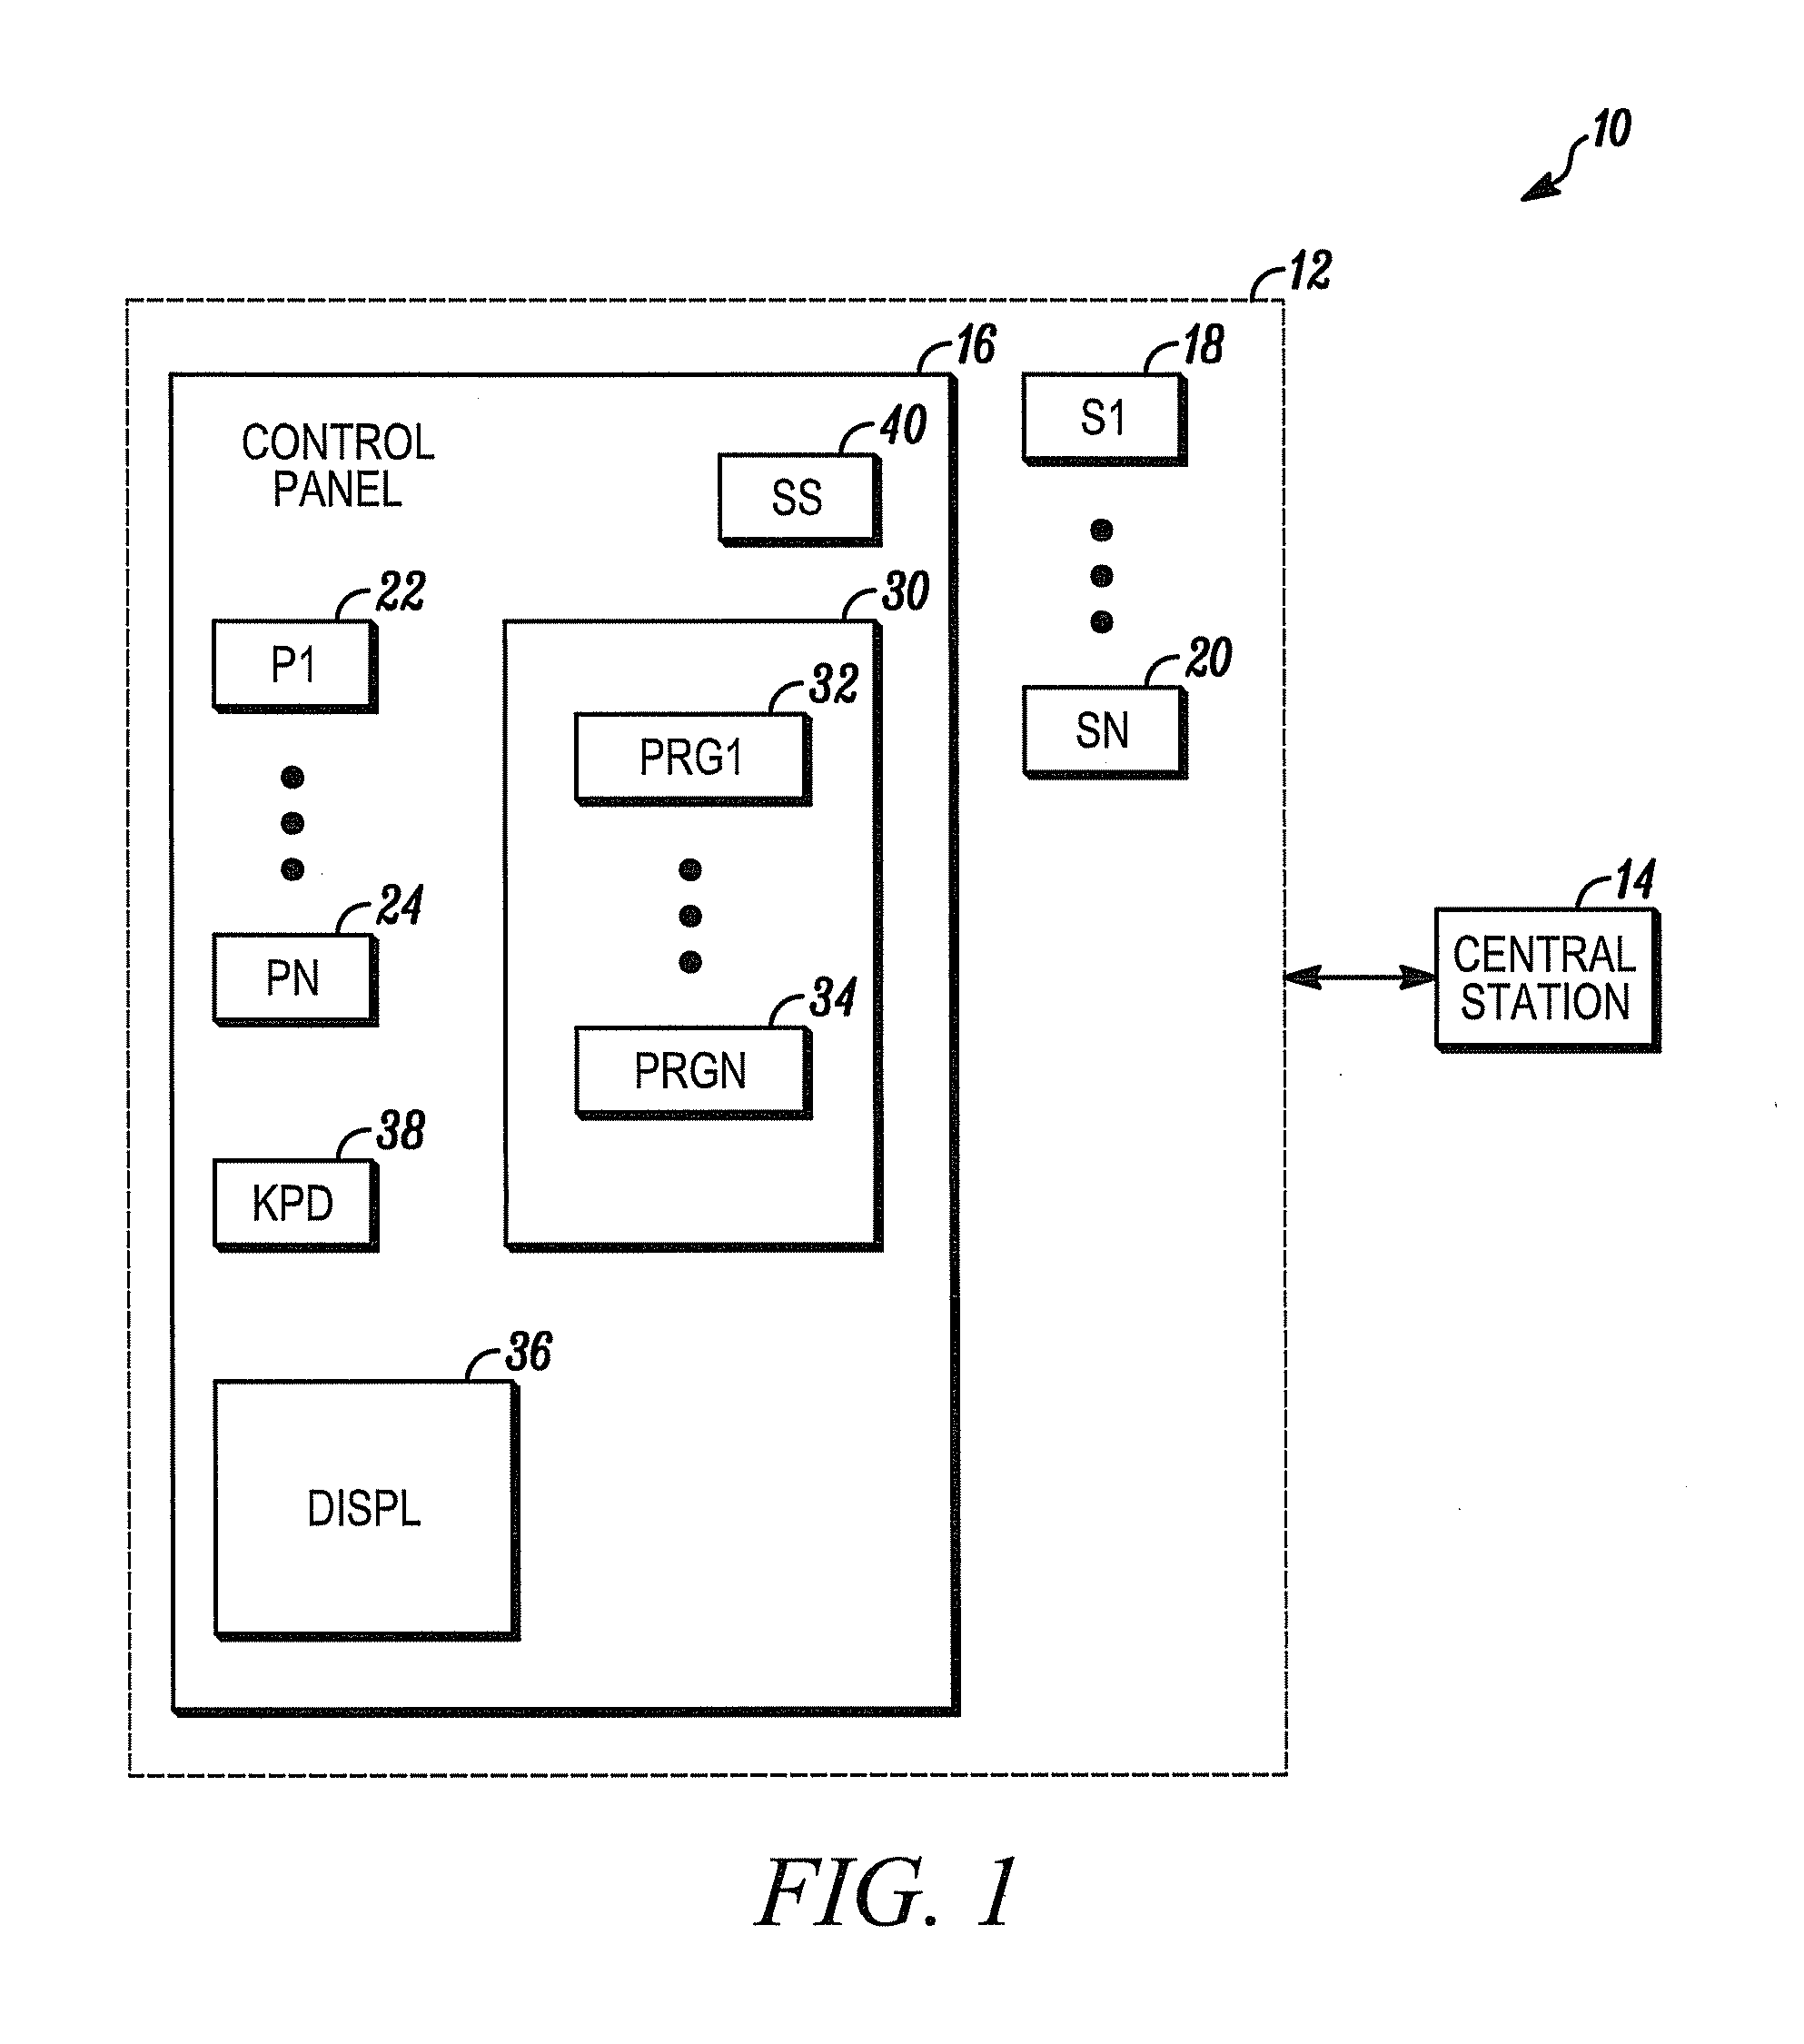 Method and apparatus for detecting control panel attacks in a security system